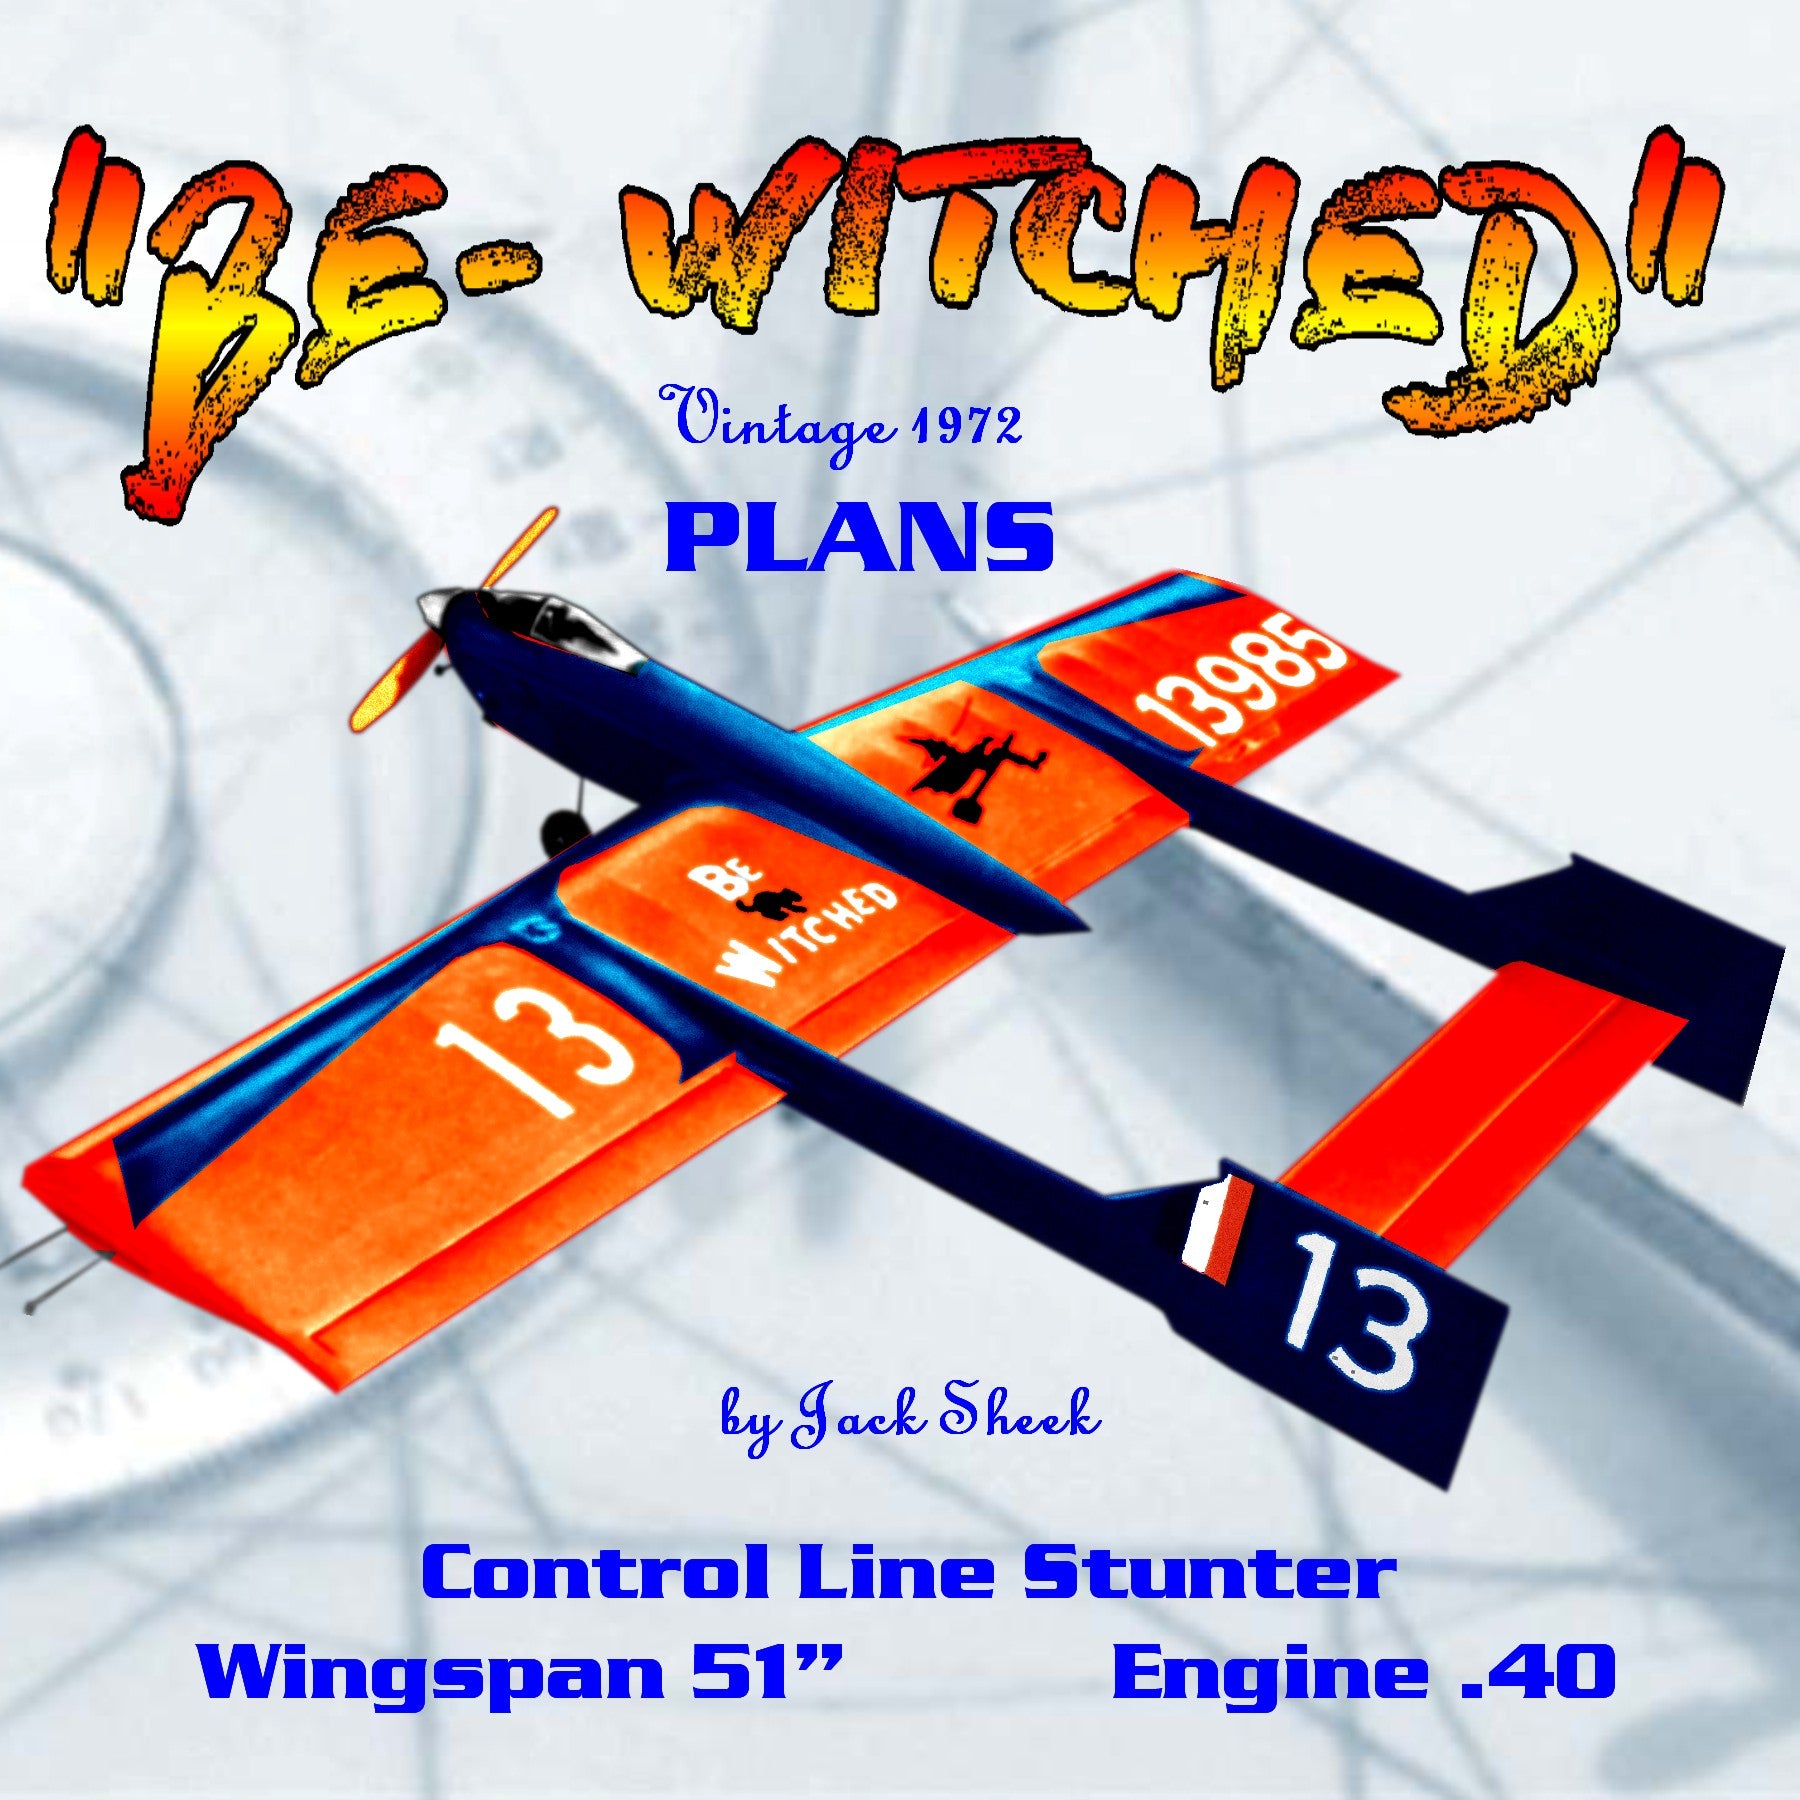 full size printed plans vintage 1972 control line stunter “be- witched” turns a good flights